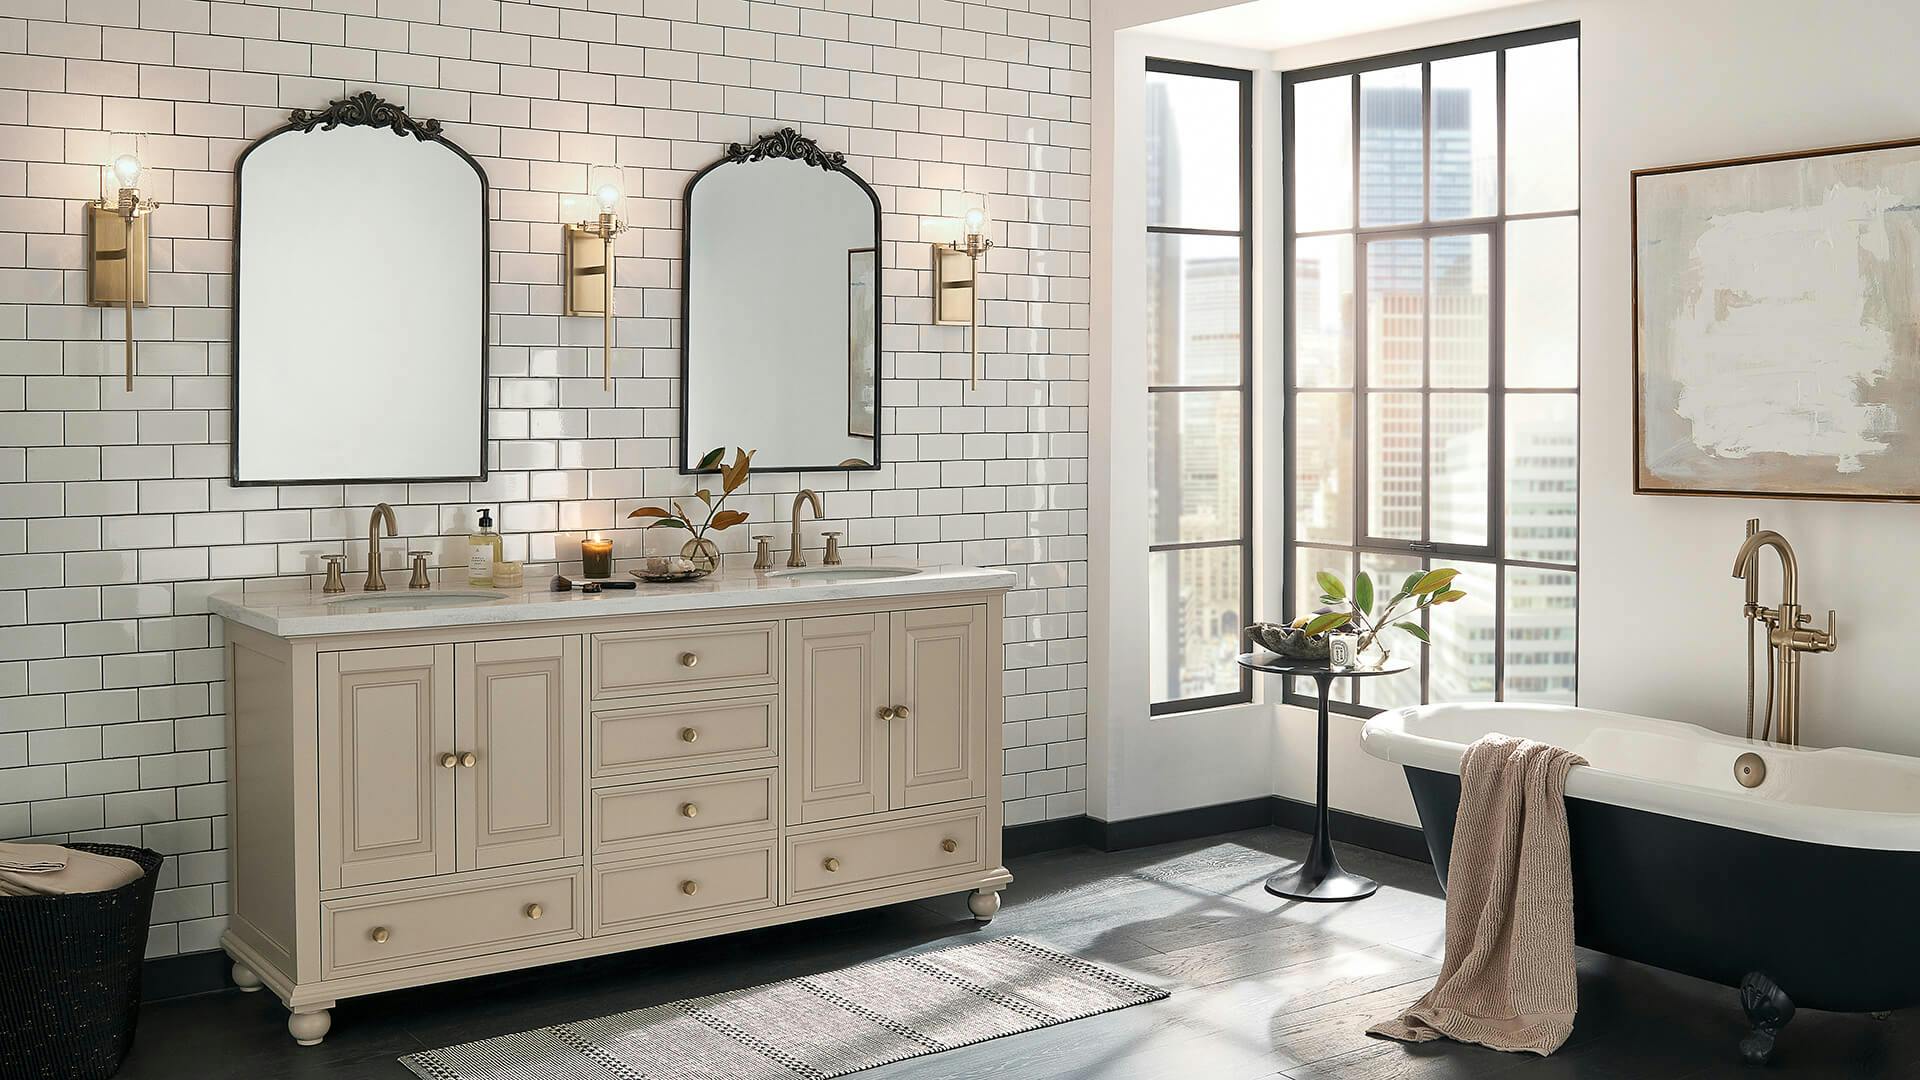 Bathroom during the day with white wall tiles and large windows in a high rise featuring alton gold finish wall sconces next to two mirrors